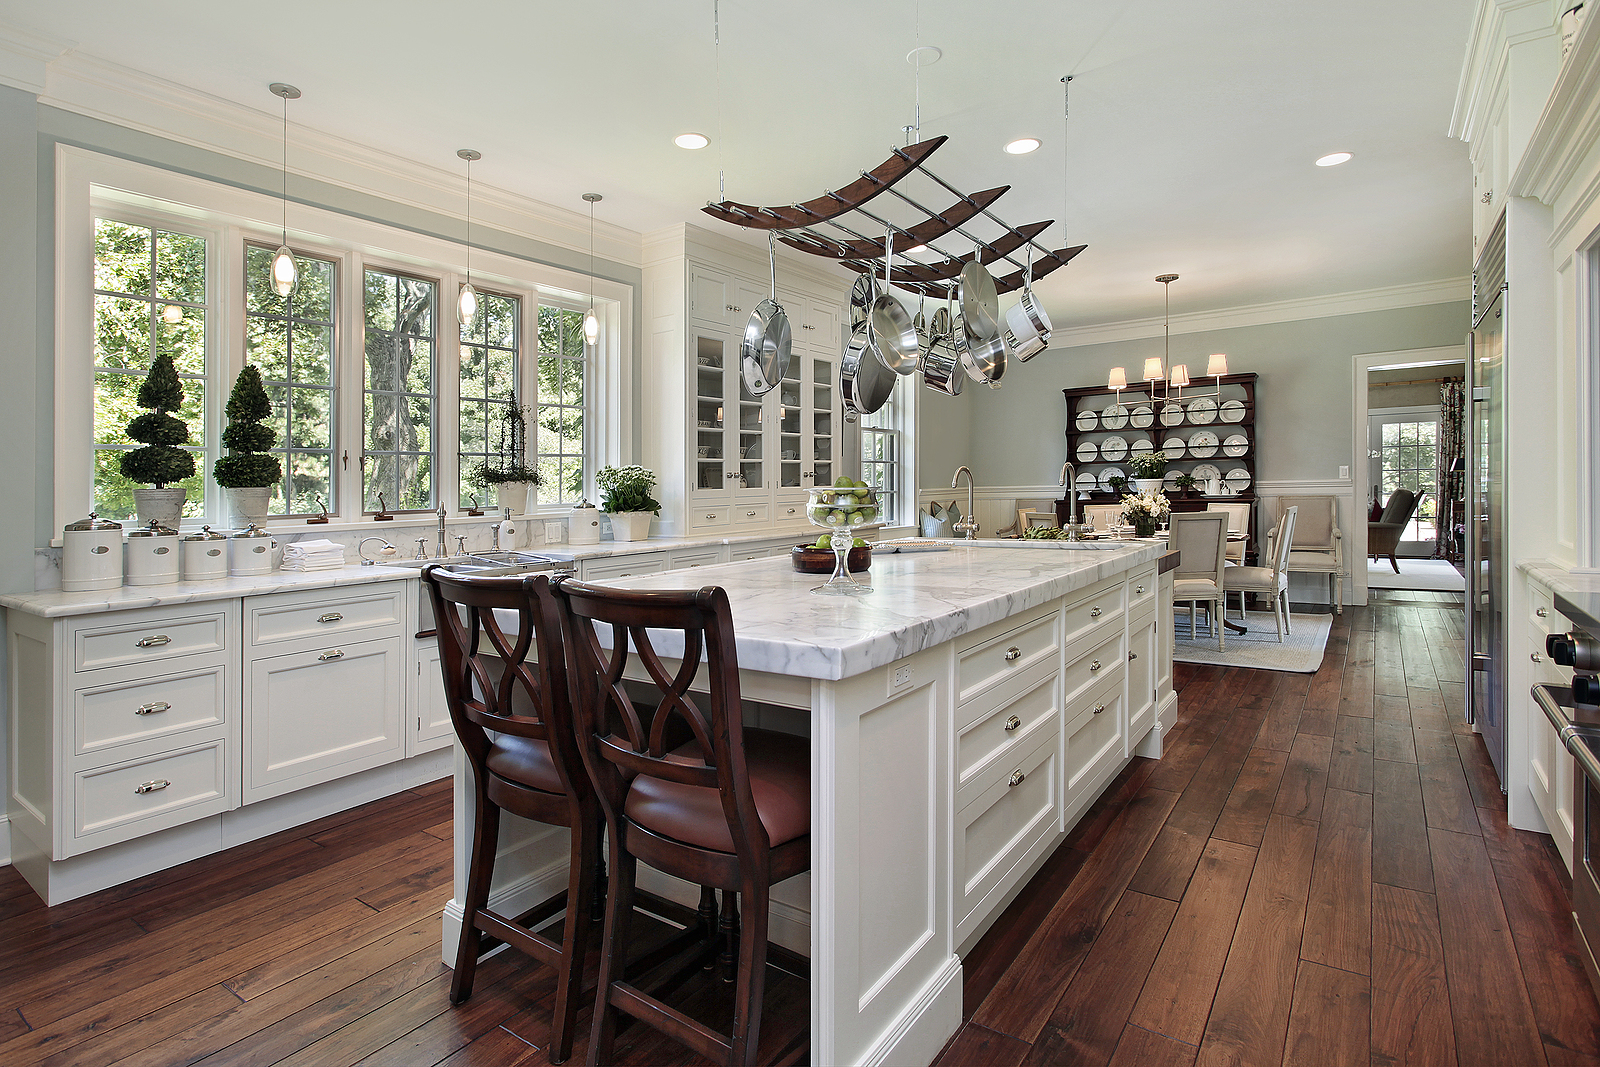 https://www.cabinetdoors.com/product_images/uploaded_images/bigstock-kitchen-in-luxury-home-with-wh-16568375.jpg